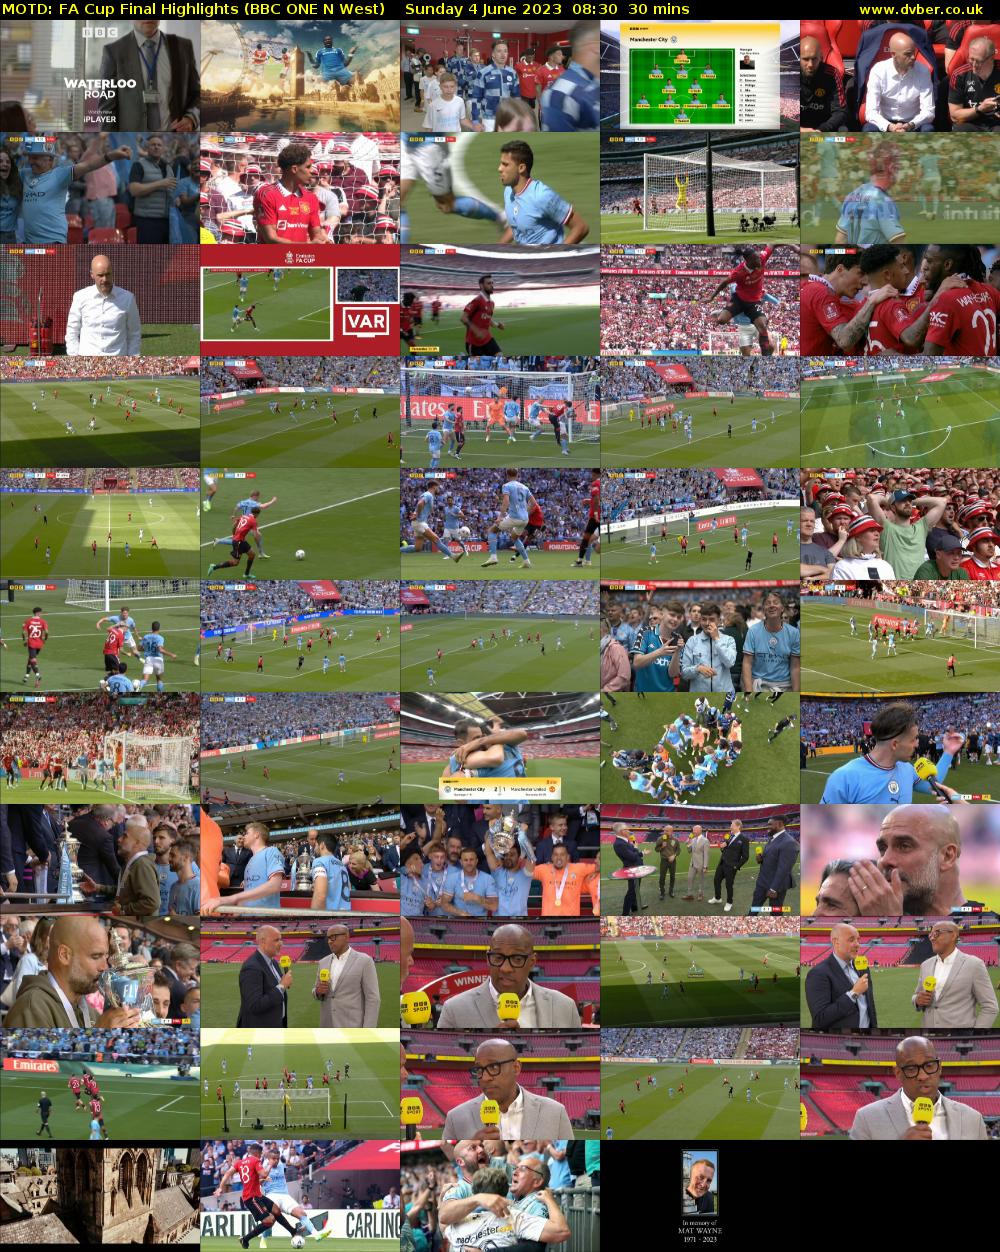 MOTD: FA Cup Final Highlights (BBC ONE N West) Sunday 4 June 2023 08:30 - 09:00